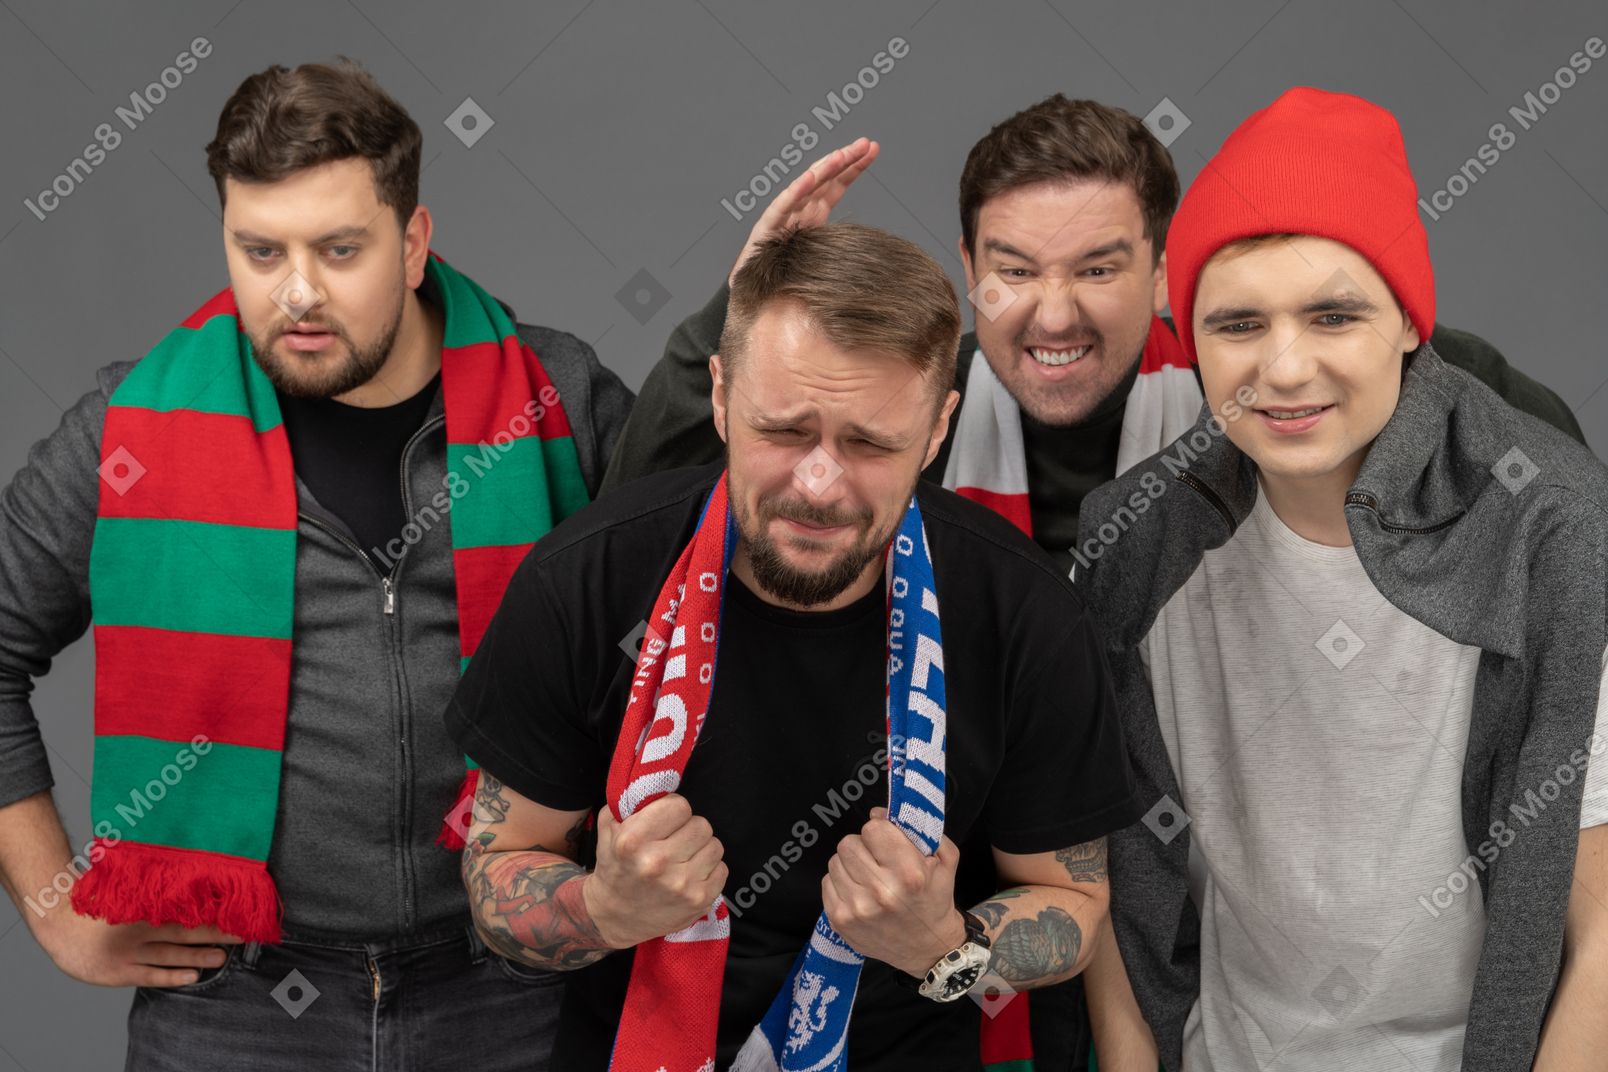 Close-up of four upset male football fans